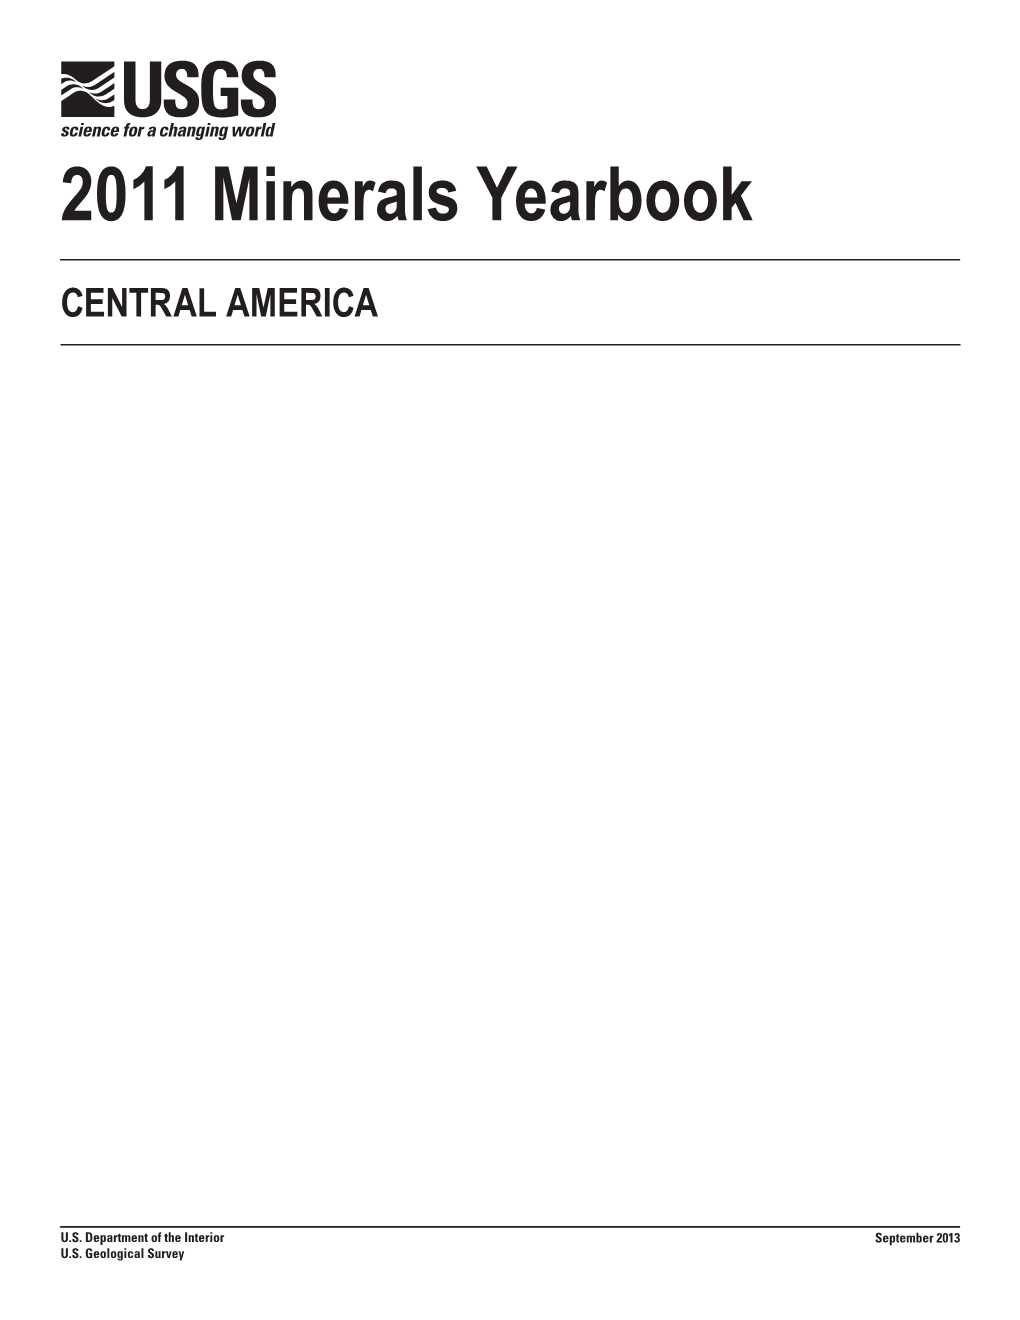 The Mineral Industries of Central America in 2011